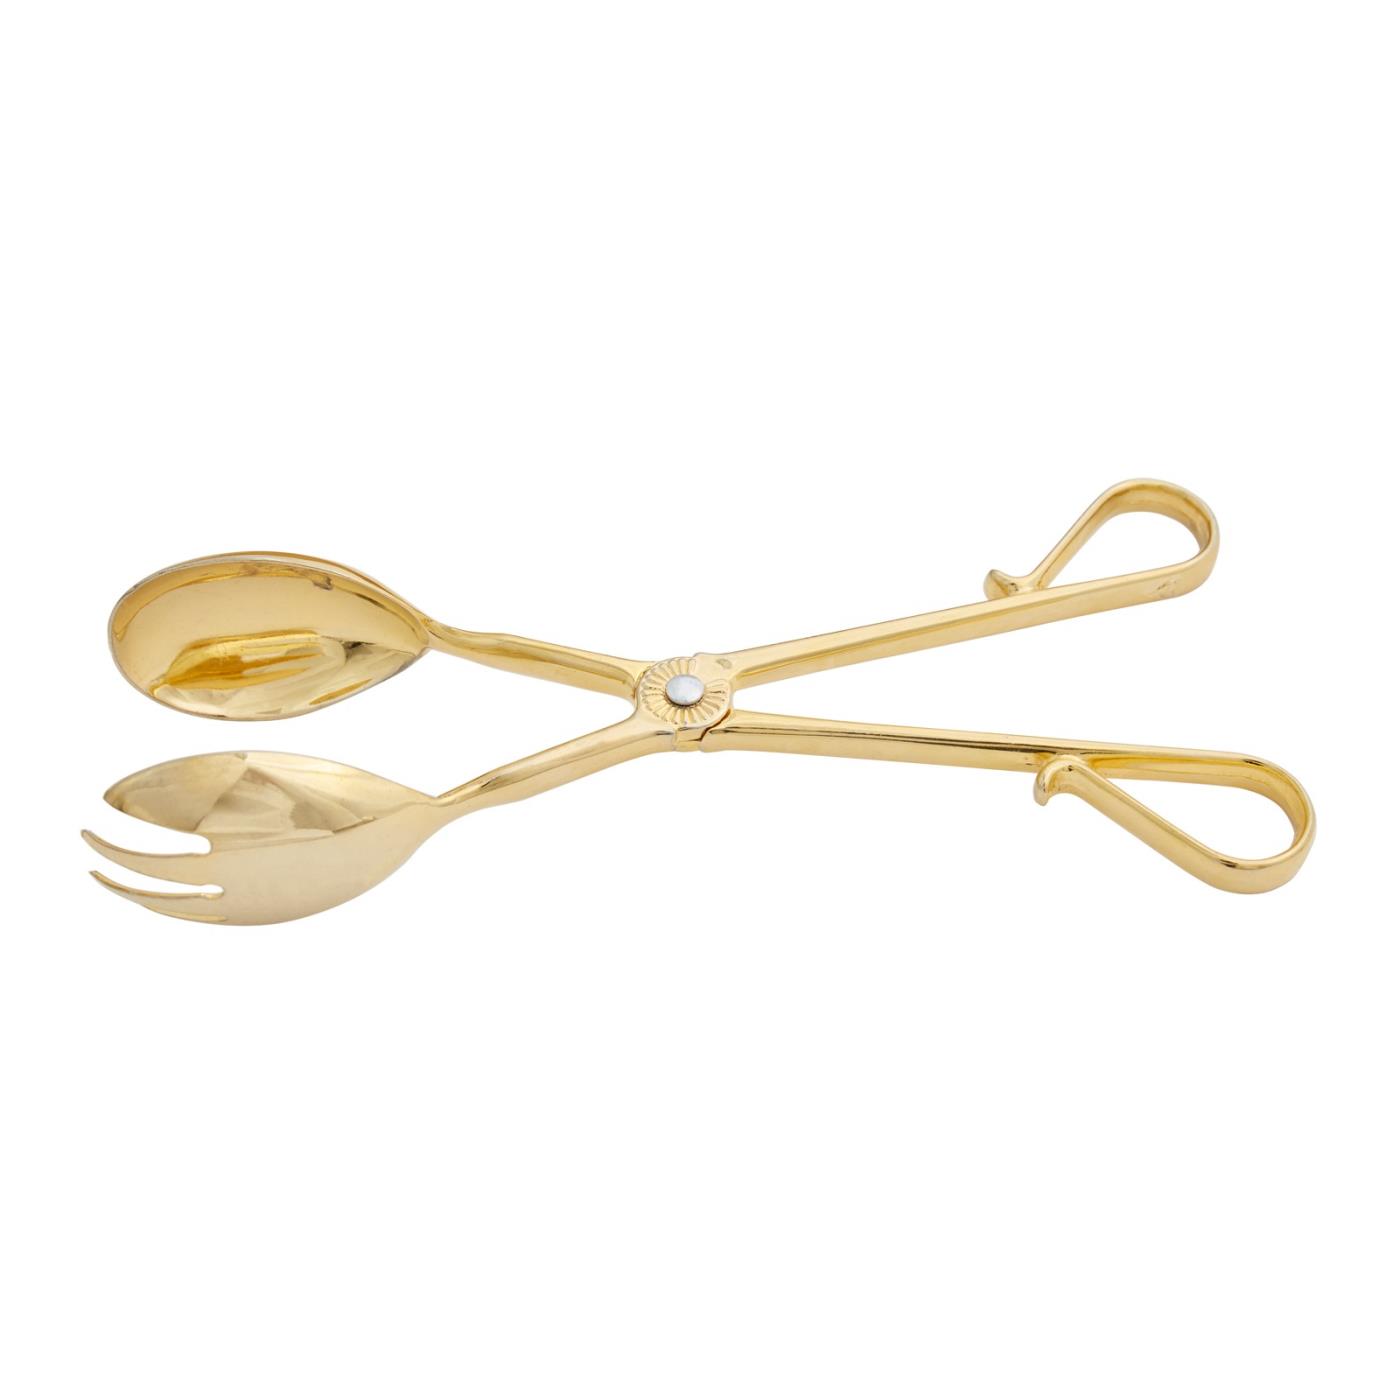 Serving/Salad Tongs - Gold - Limited Quantities Available